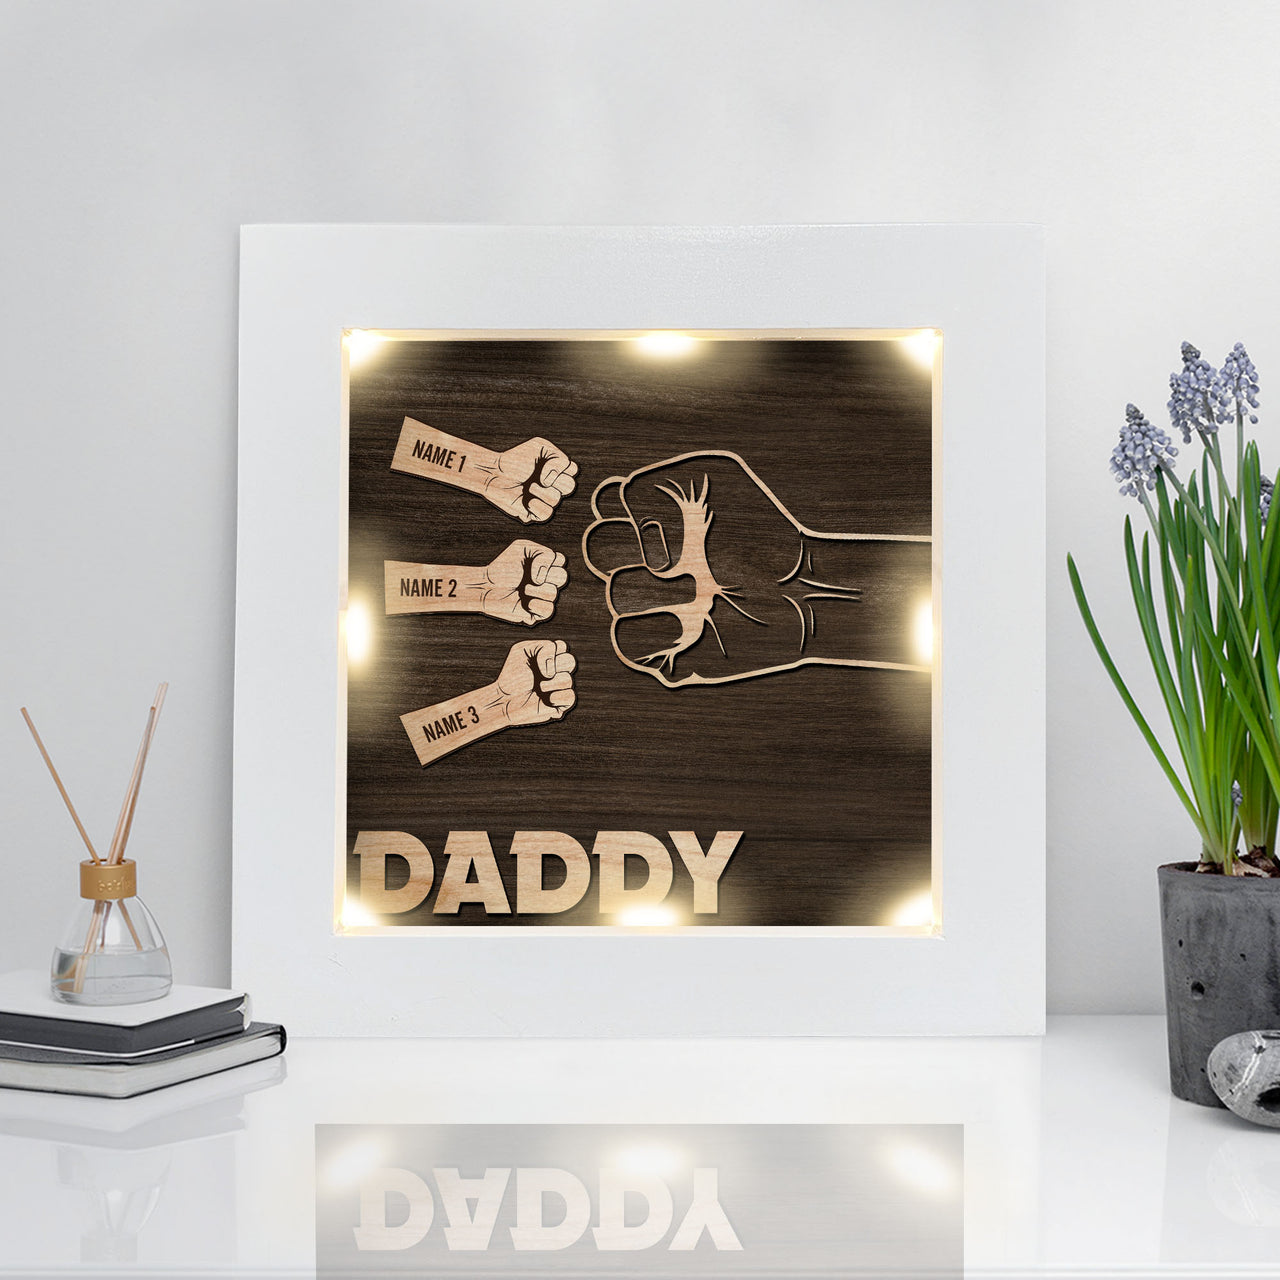 Custom First Fathers Day Gift Ideas Plaques Frame With Led Personalized Fathers Day Gifts - Gifts for New Dads